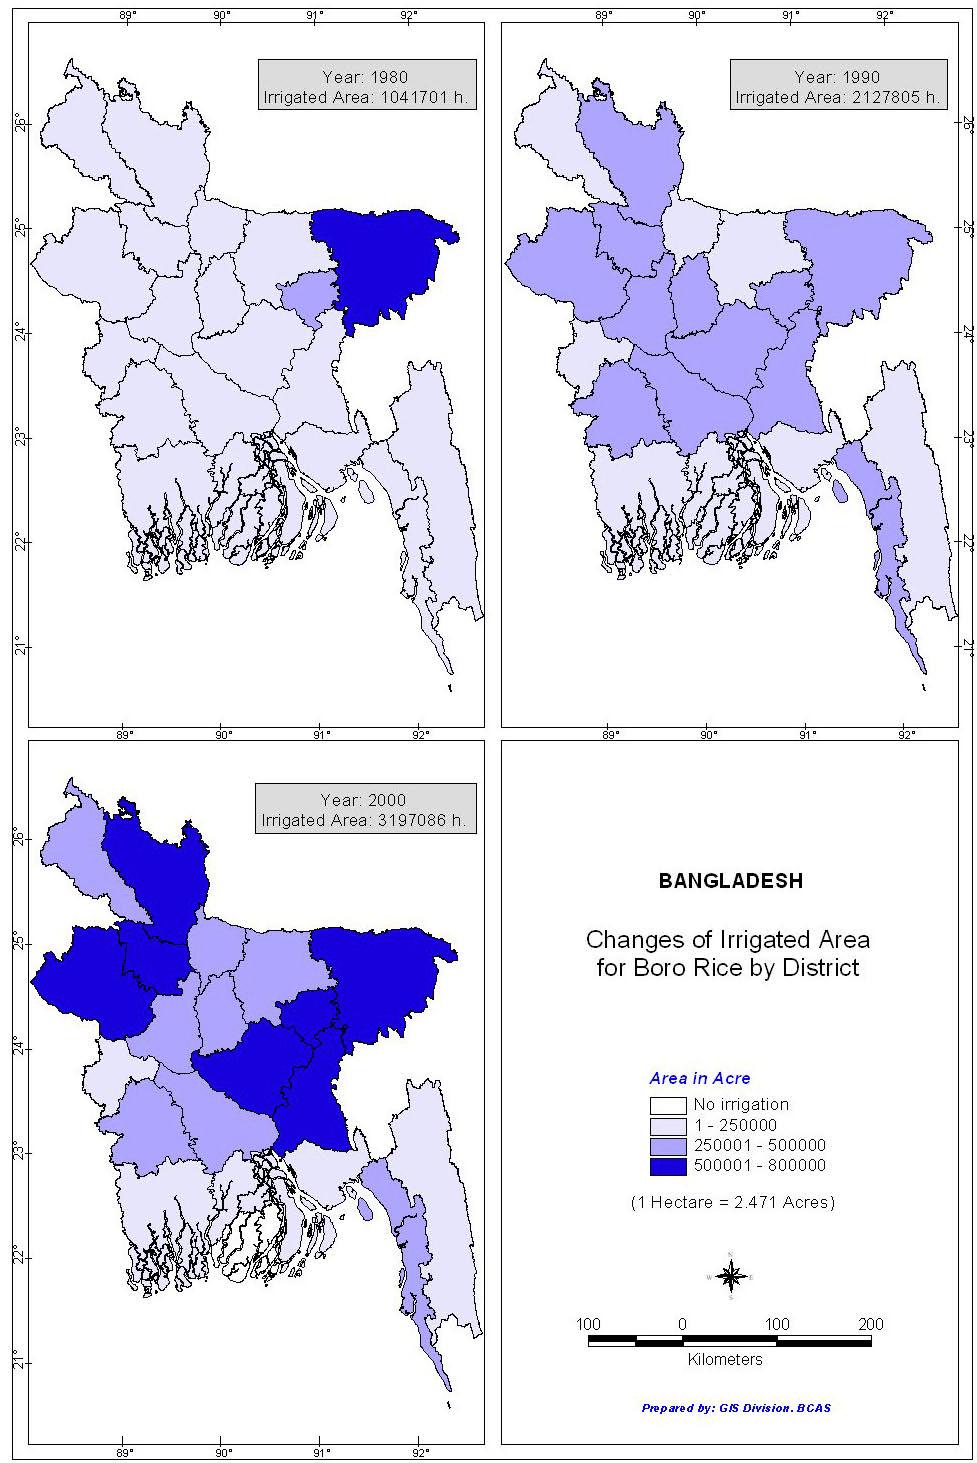 Changes in Irrigated Area for Boro Irrigated area under Boro Rice has increased significantly compared to other rice crops Major increases noticed in northwest, northeast and central regions Boro